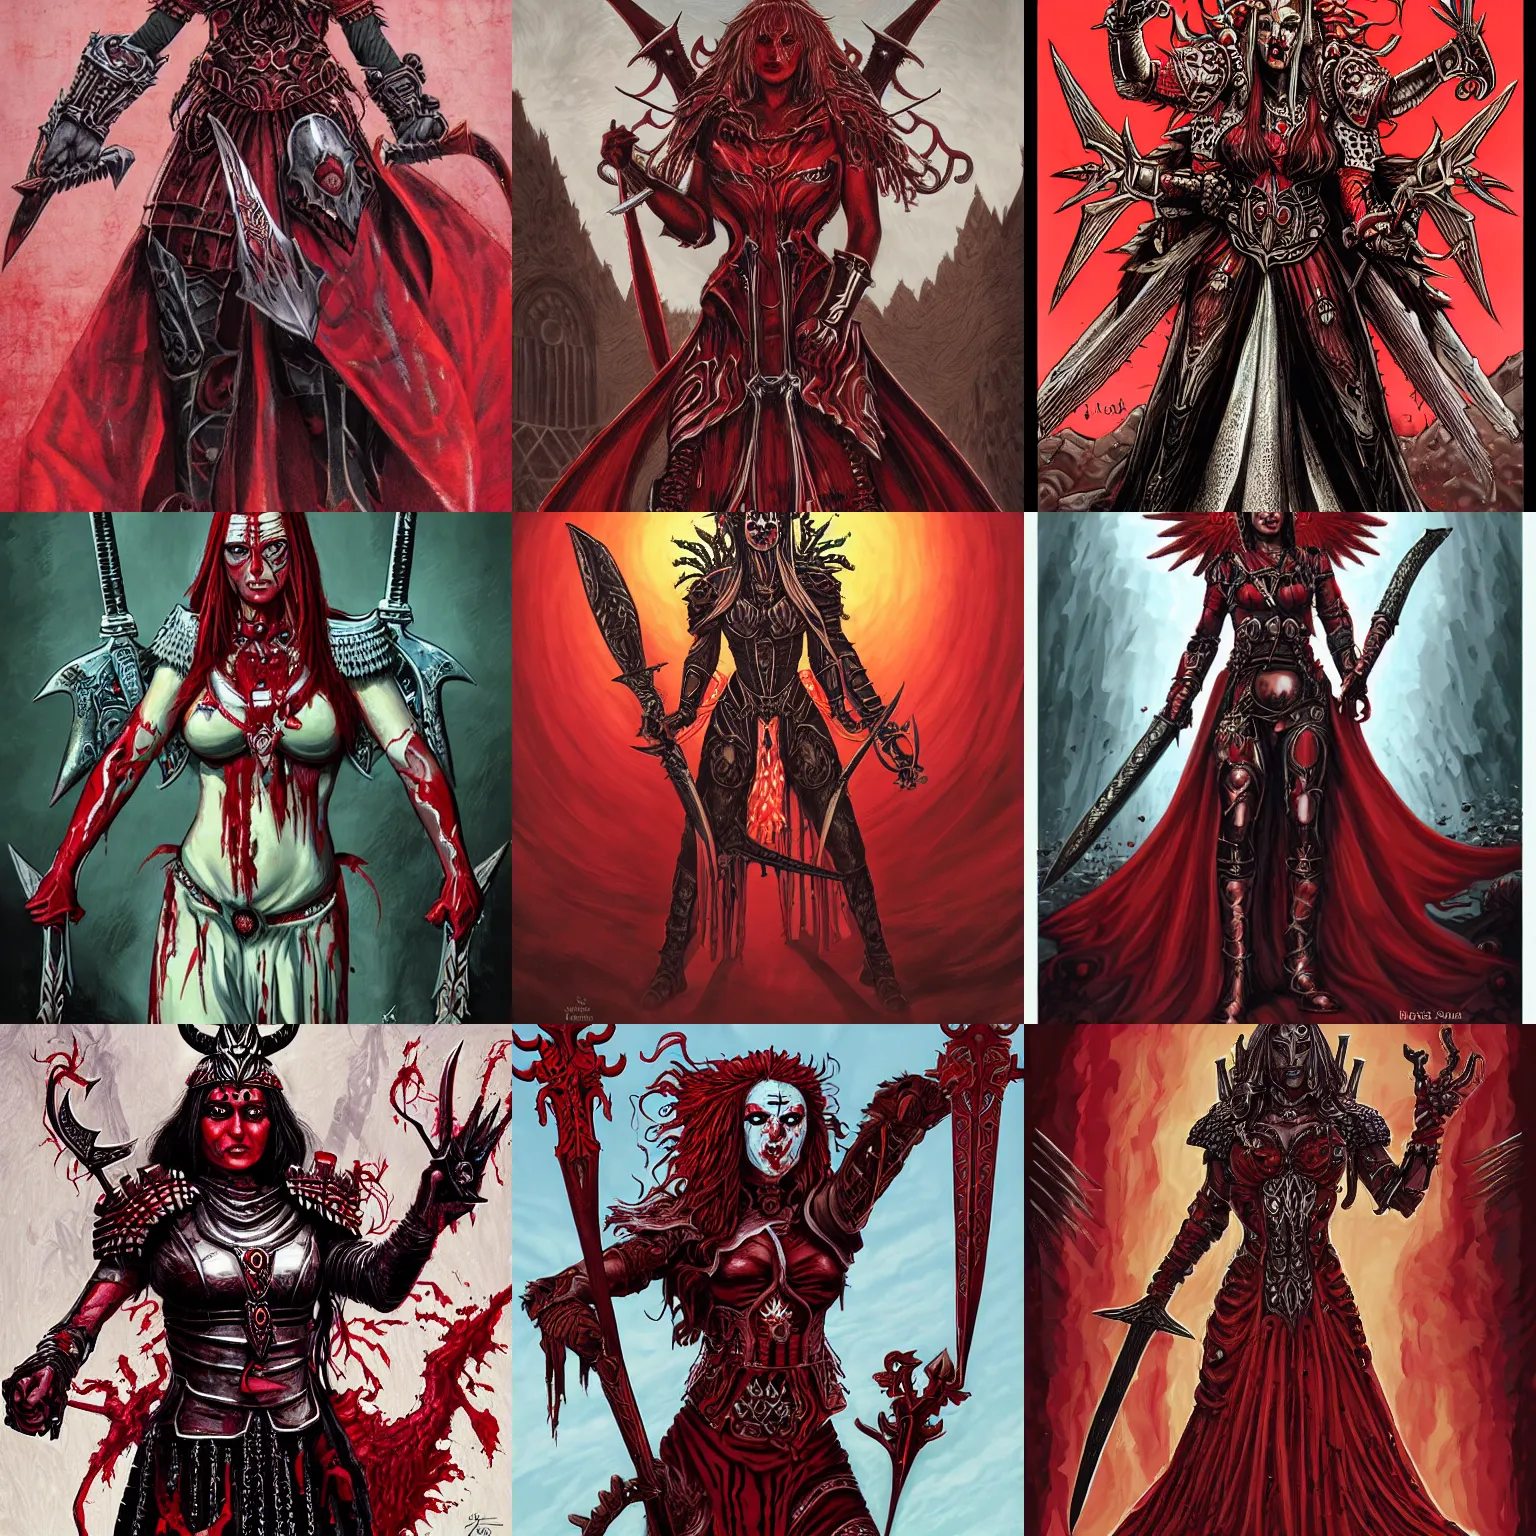 Prompt: Valkia the Bloody, the Gorequeen, the Valkyrie, the Bringer of Glory, the Sword-Maiden of the Blood God and the Dread-Consort of Khorne by Jeffrey Smith